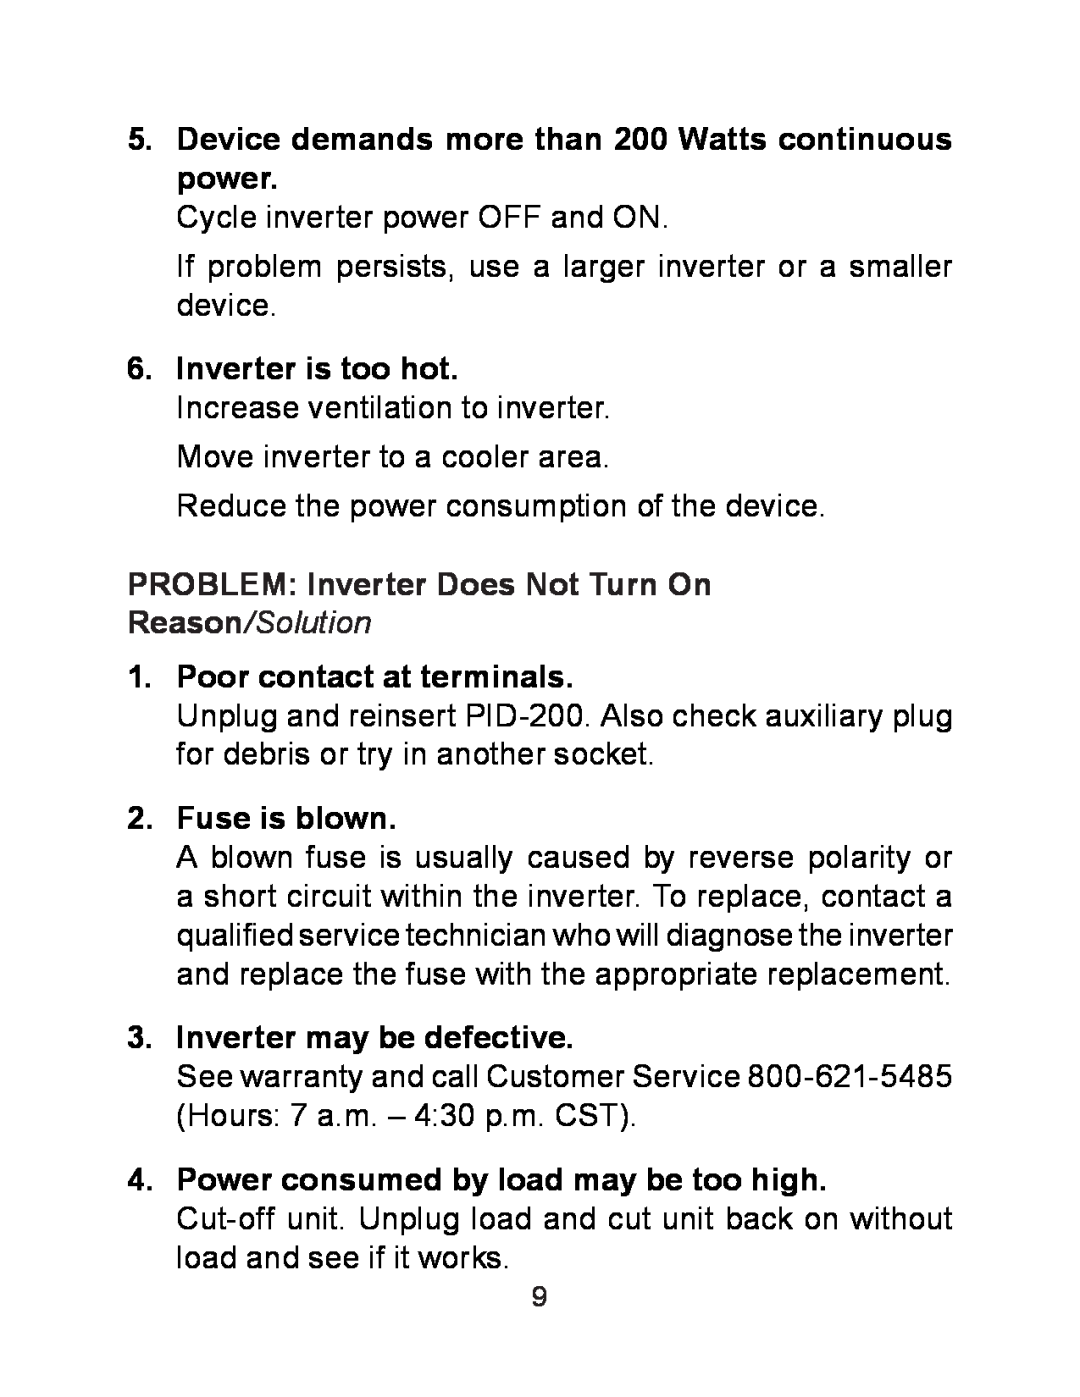 Schumacher PID-200 owner manual Device demands more than 200 Watts continuous power, Inverter is too hot, Reason/Solution 